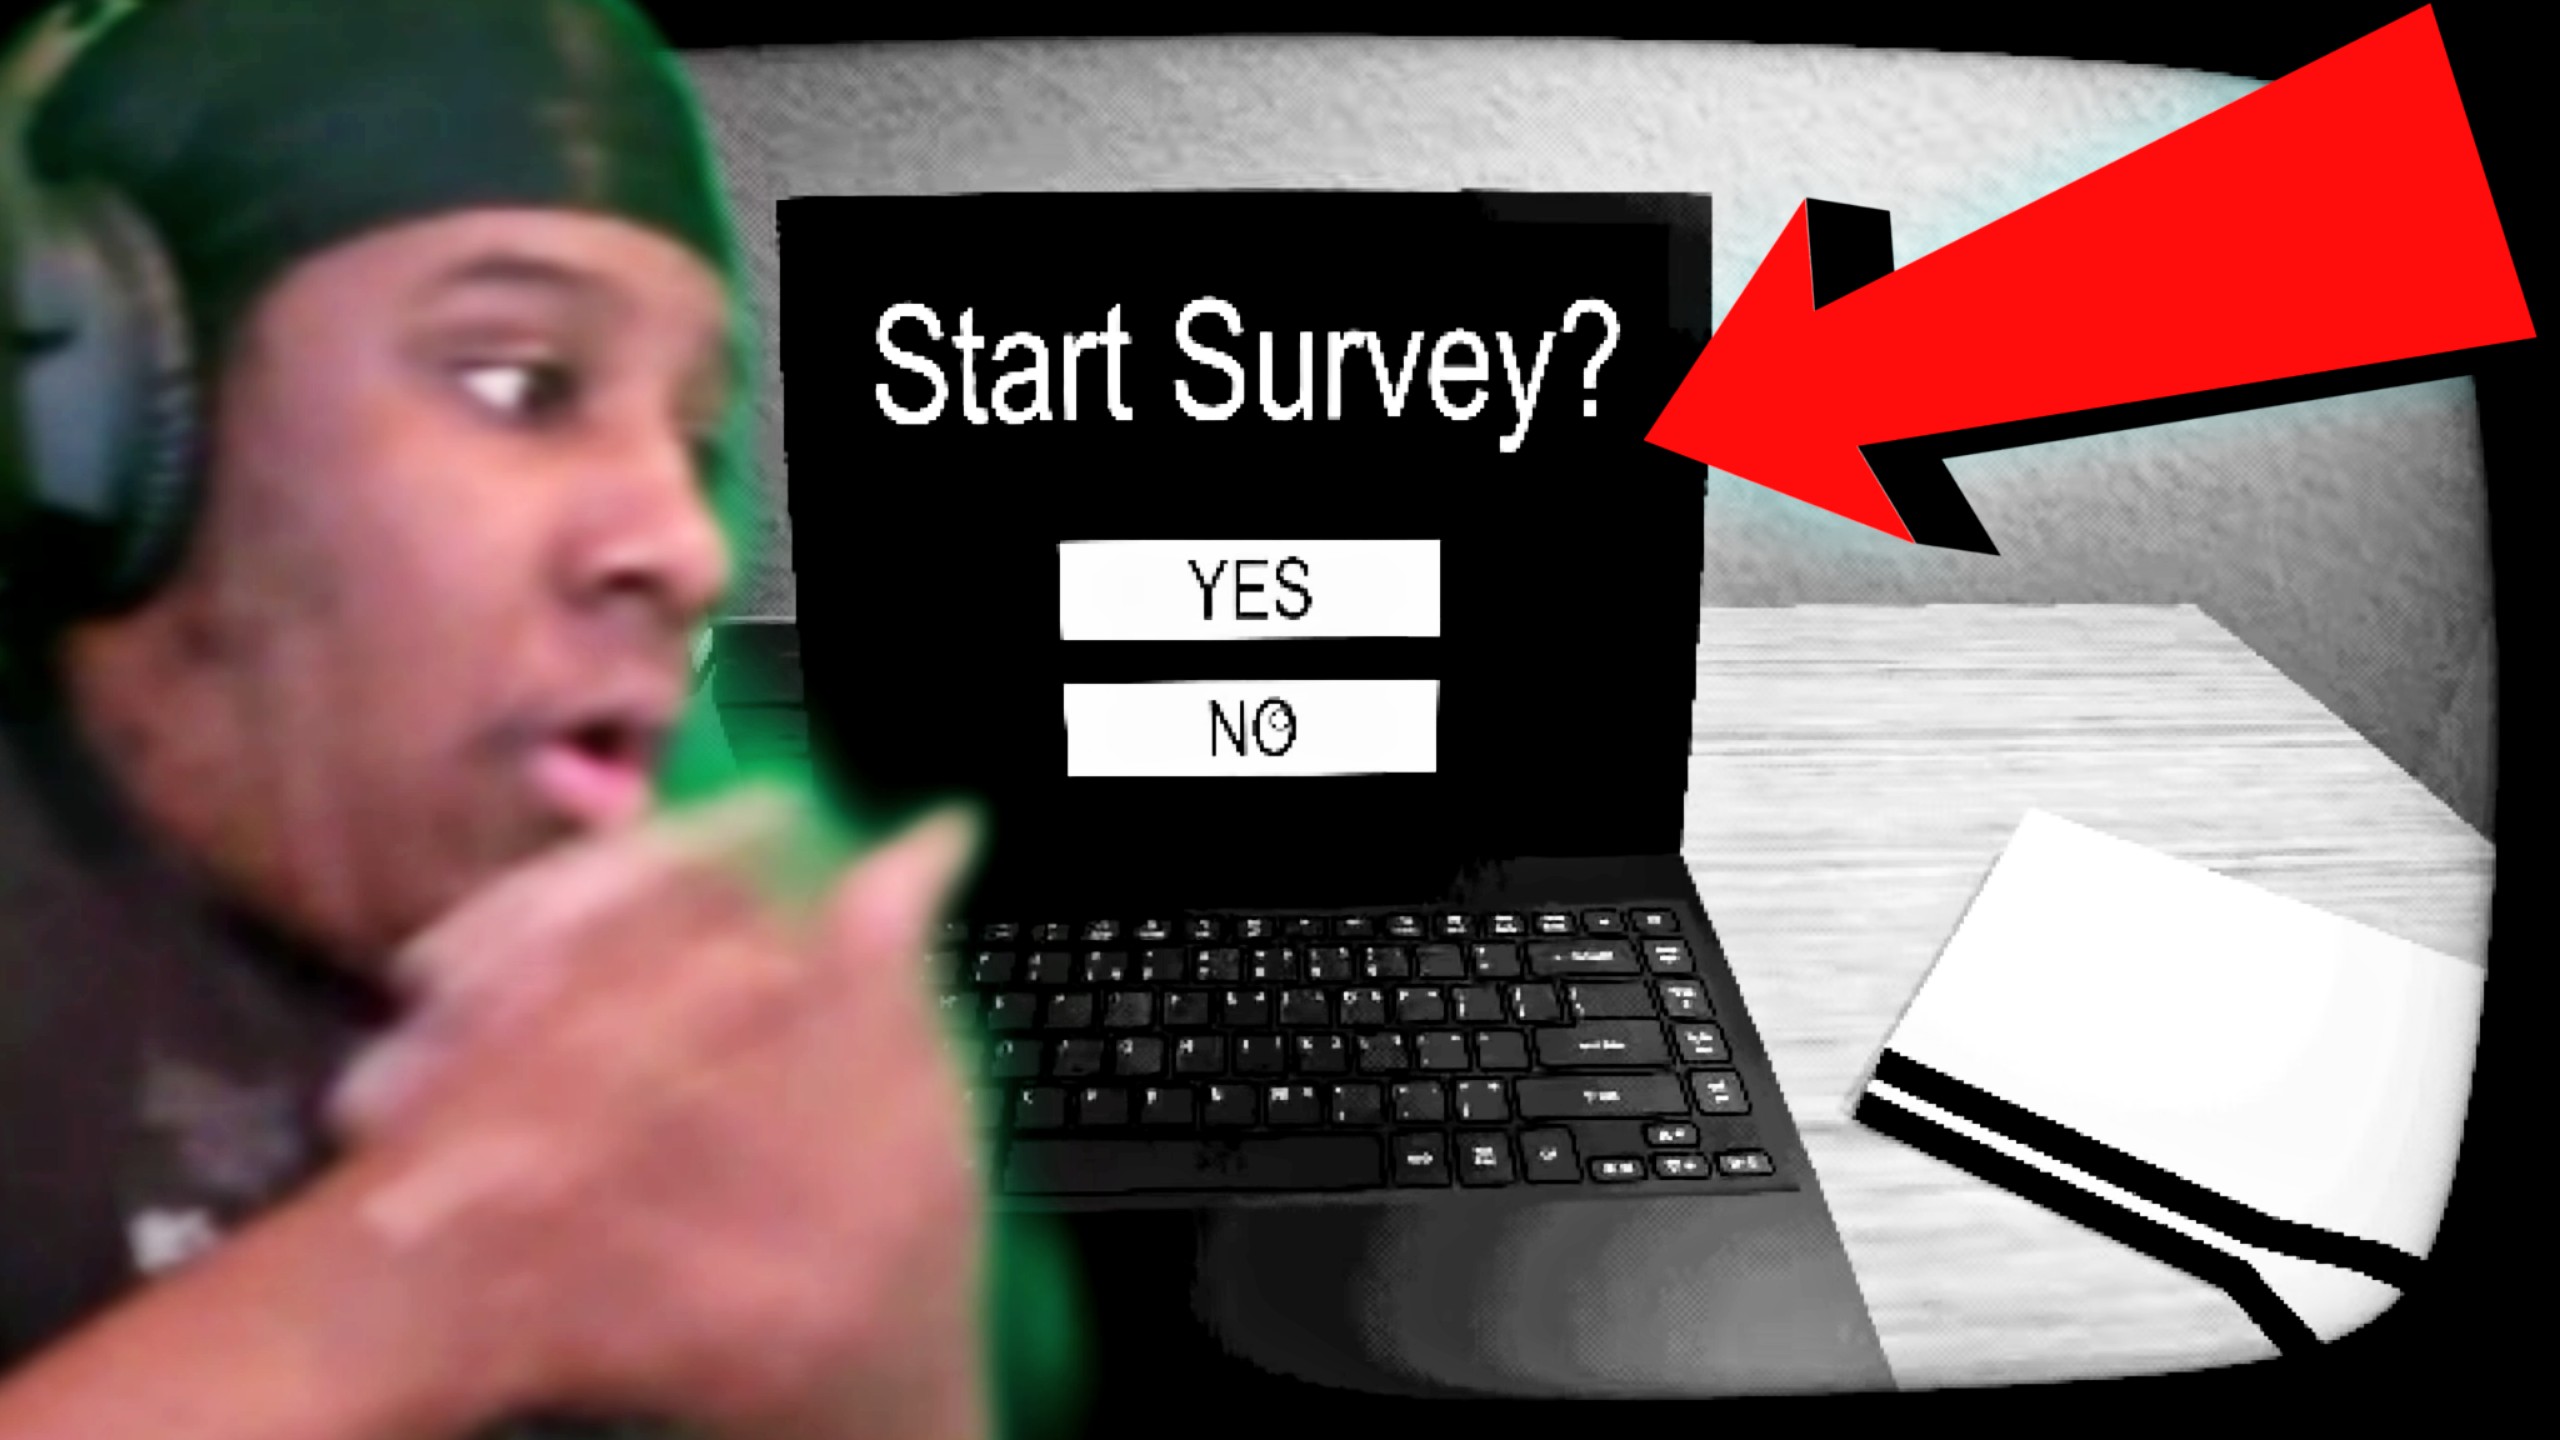 Comments 147 to 108 of 1283 - Start Survey? by PixelDough